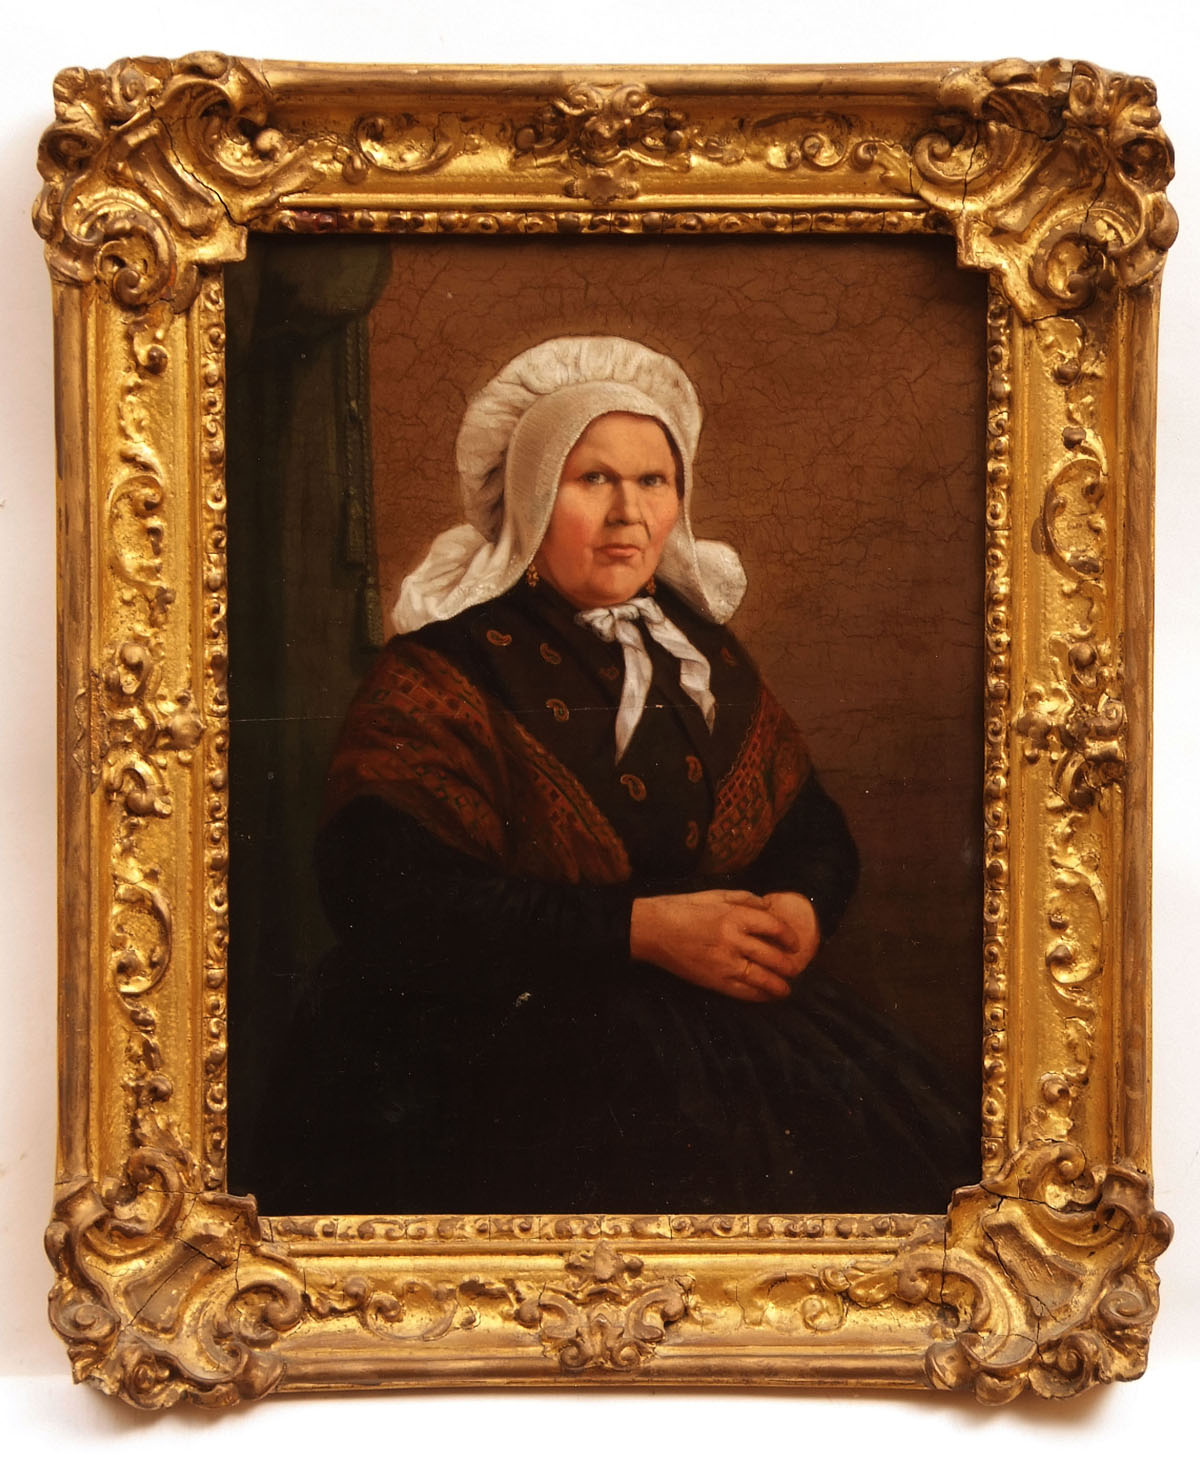 DUTCH SCHOOL (18TH CENTURY) Portrait of a Seated Lady Wearing a Mob Cap oil on panel 14 x 11 ins